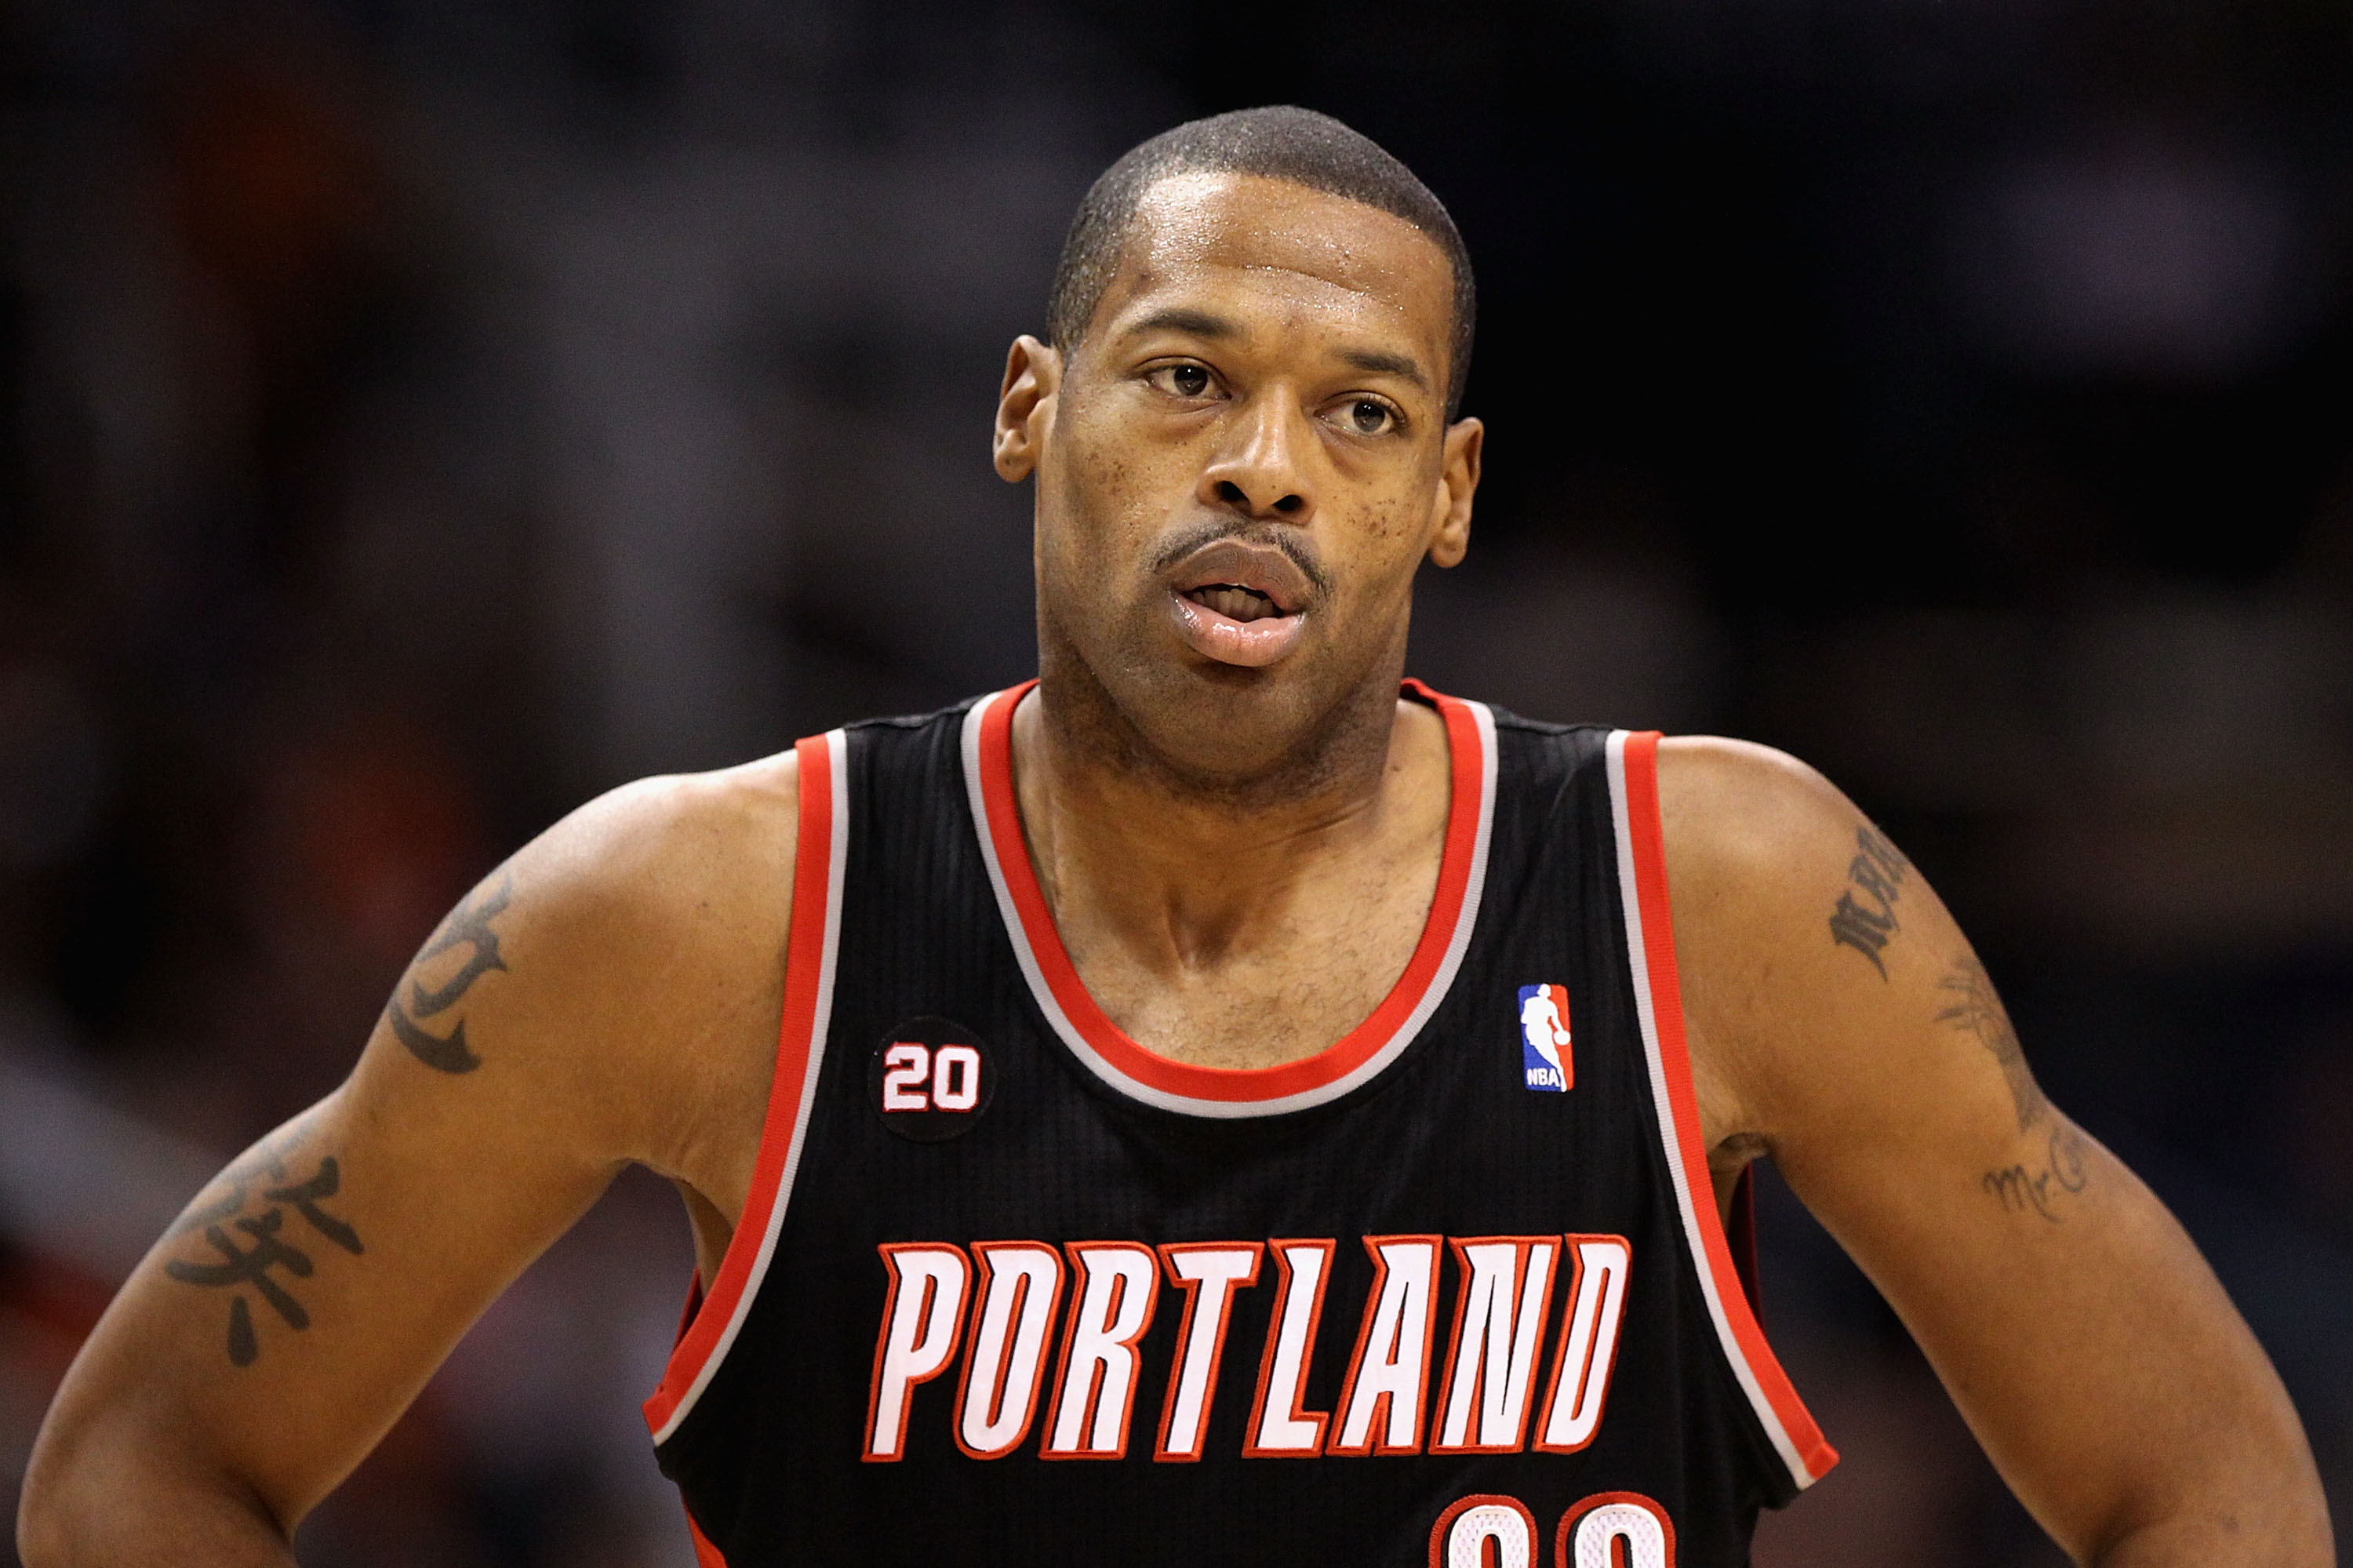 Report: Rockets to release Marcus Camby - NBC Sports